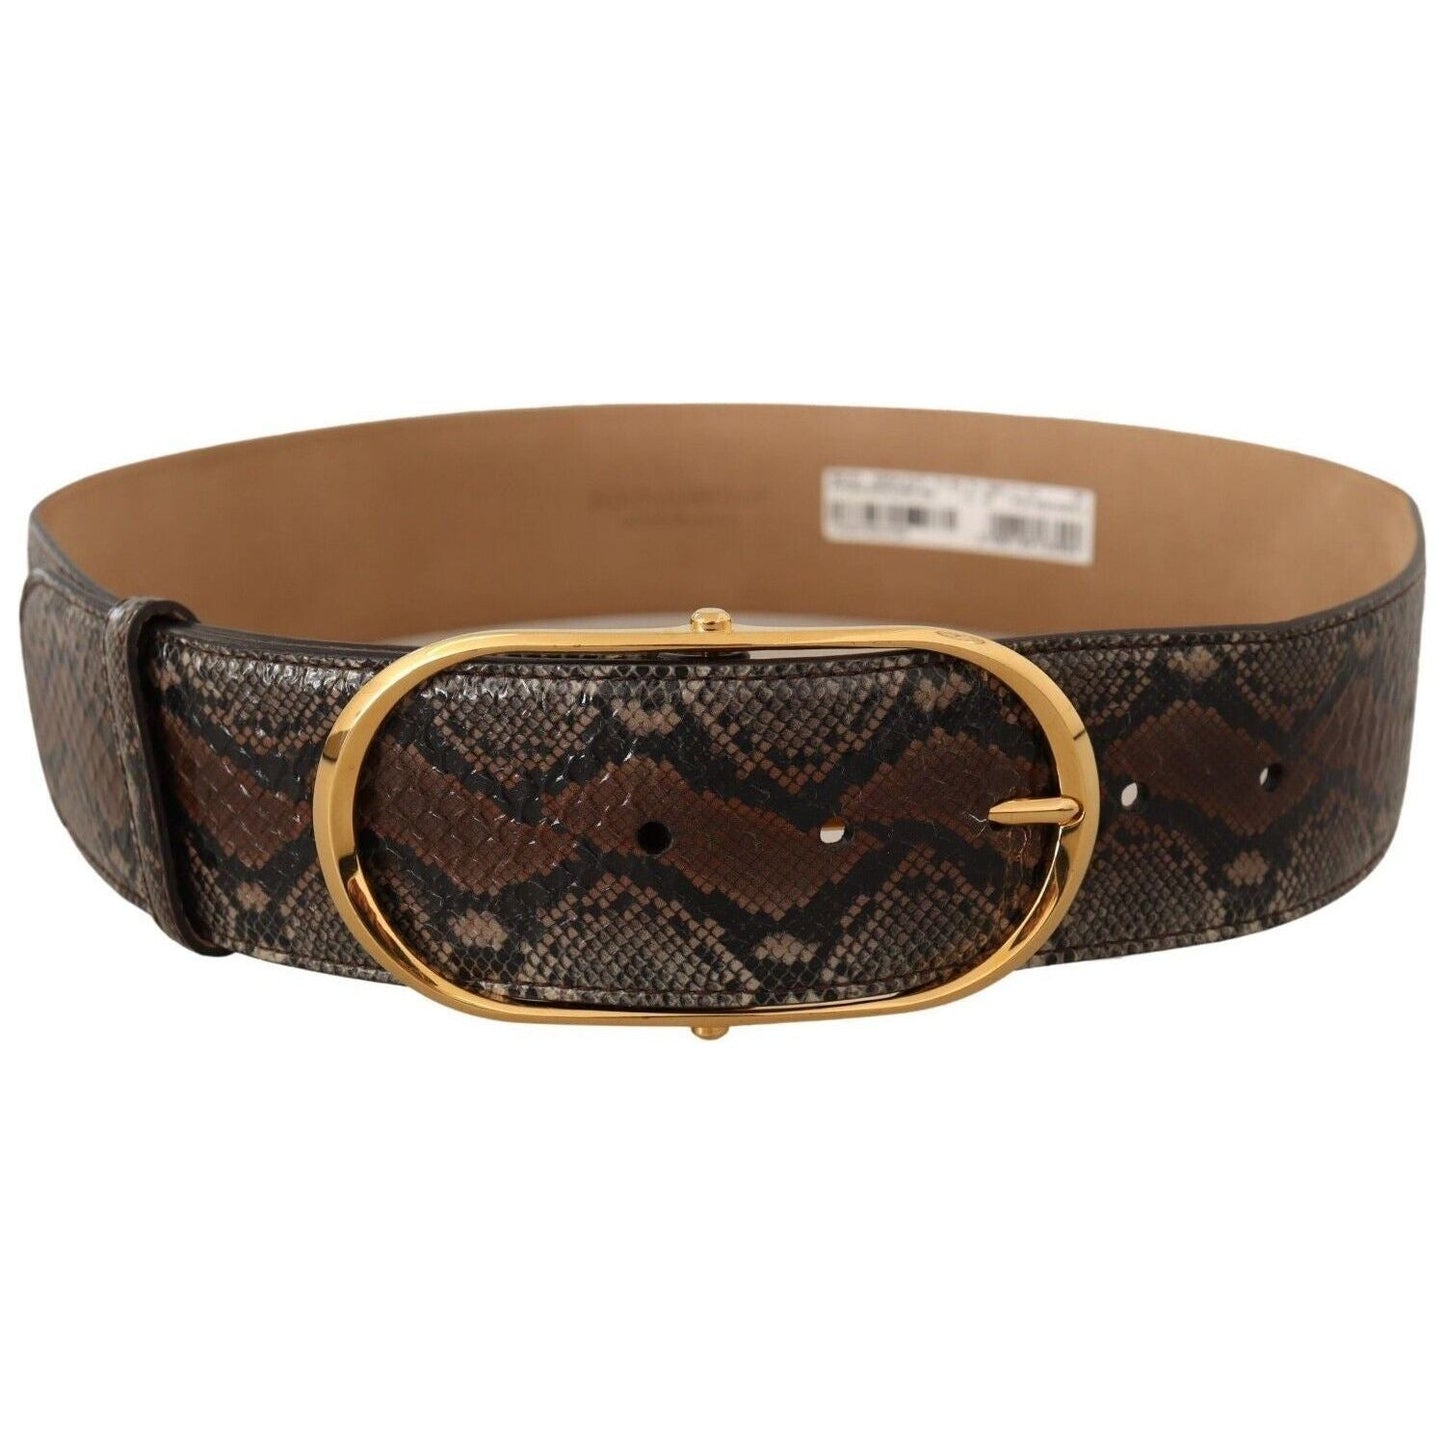 Dolce & Gabbana Elegant Brown Leather Belt with Gold Buckle brown-exotic-leather-gold-oval-buckle-belt-5 WOMAN BELTS s-l1600-3-216-6282e359-671.jpg